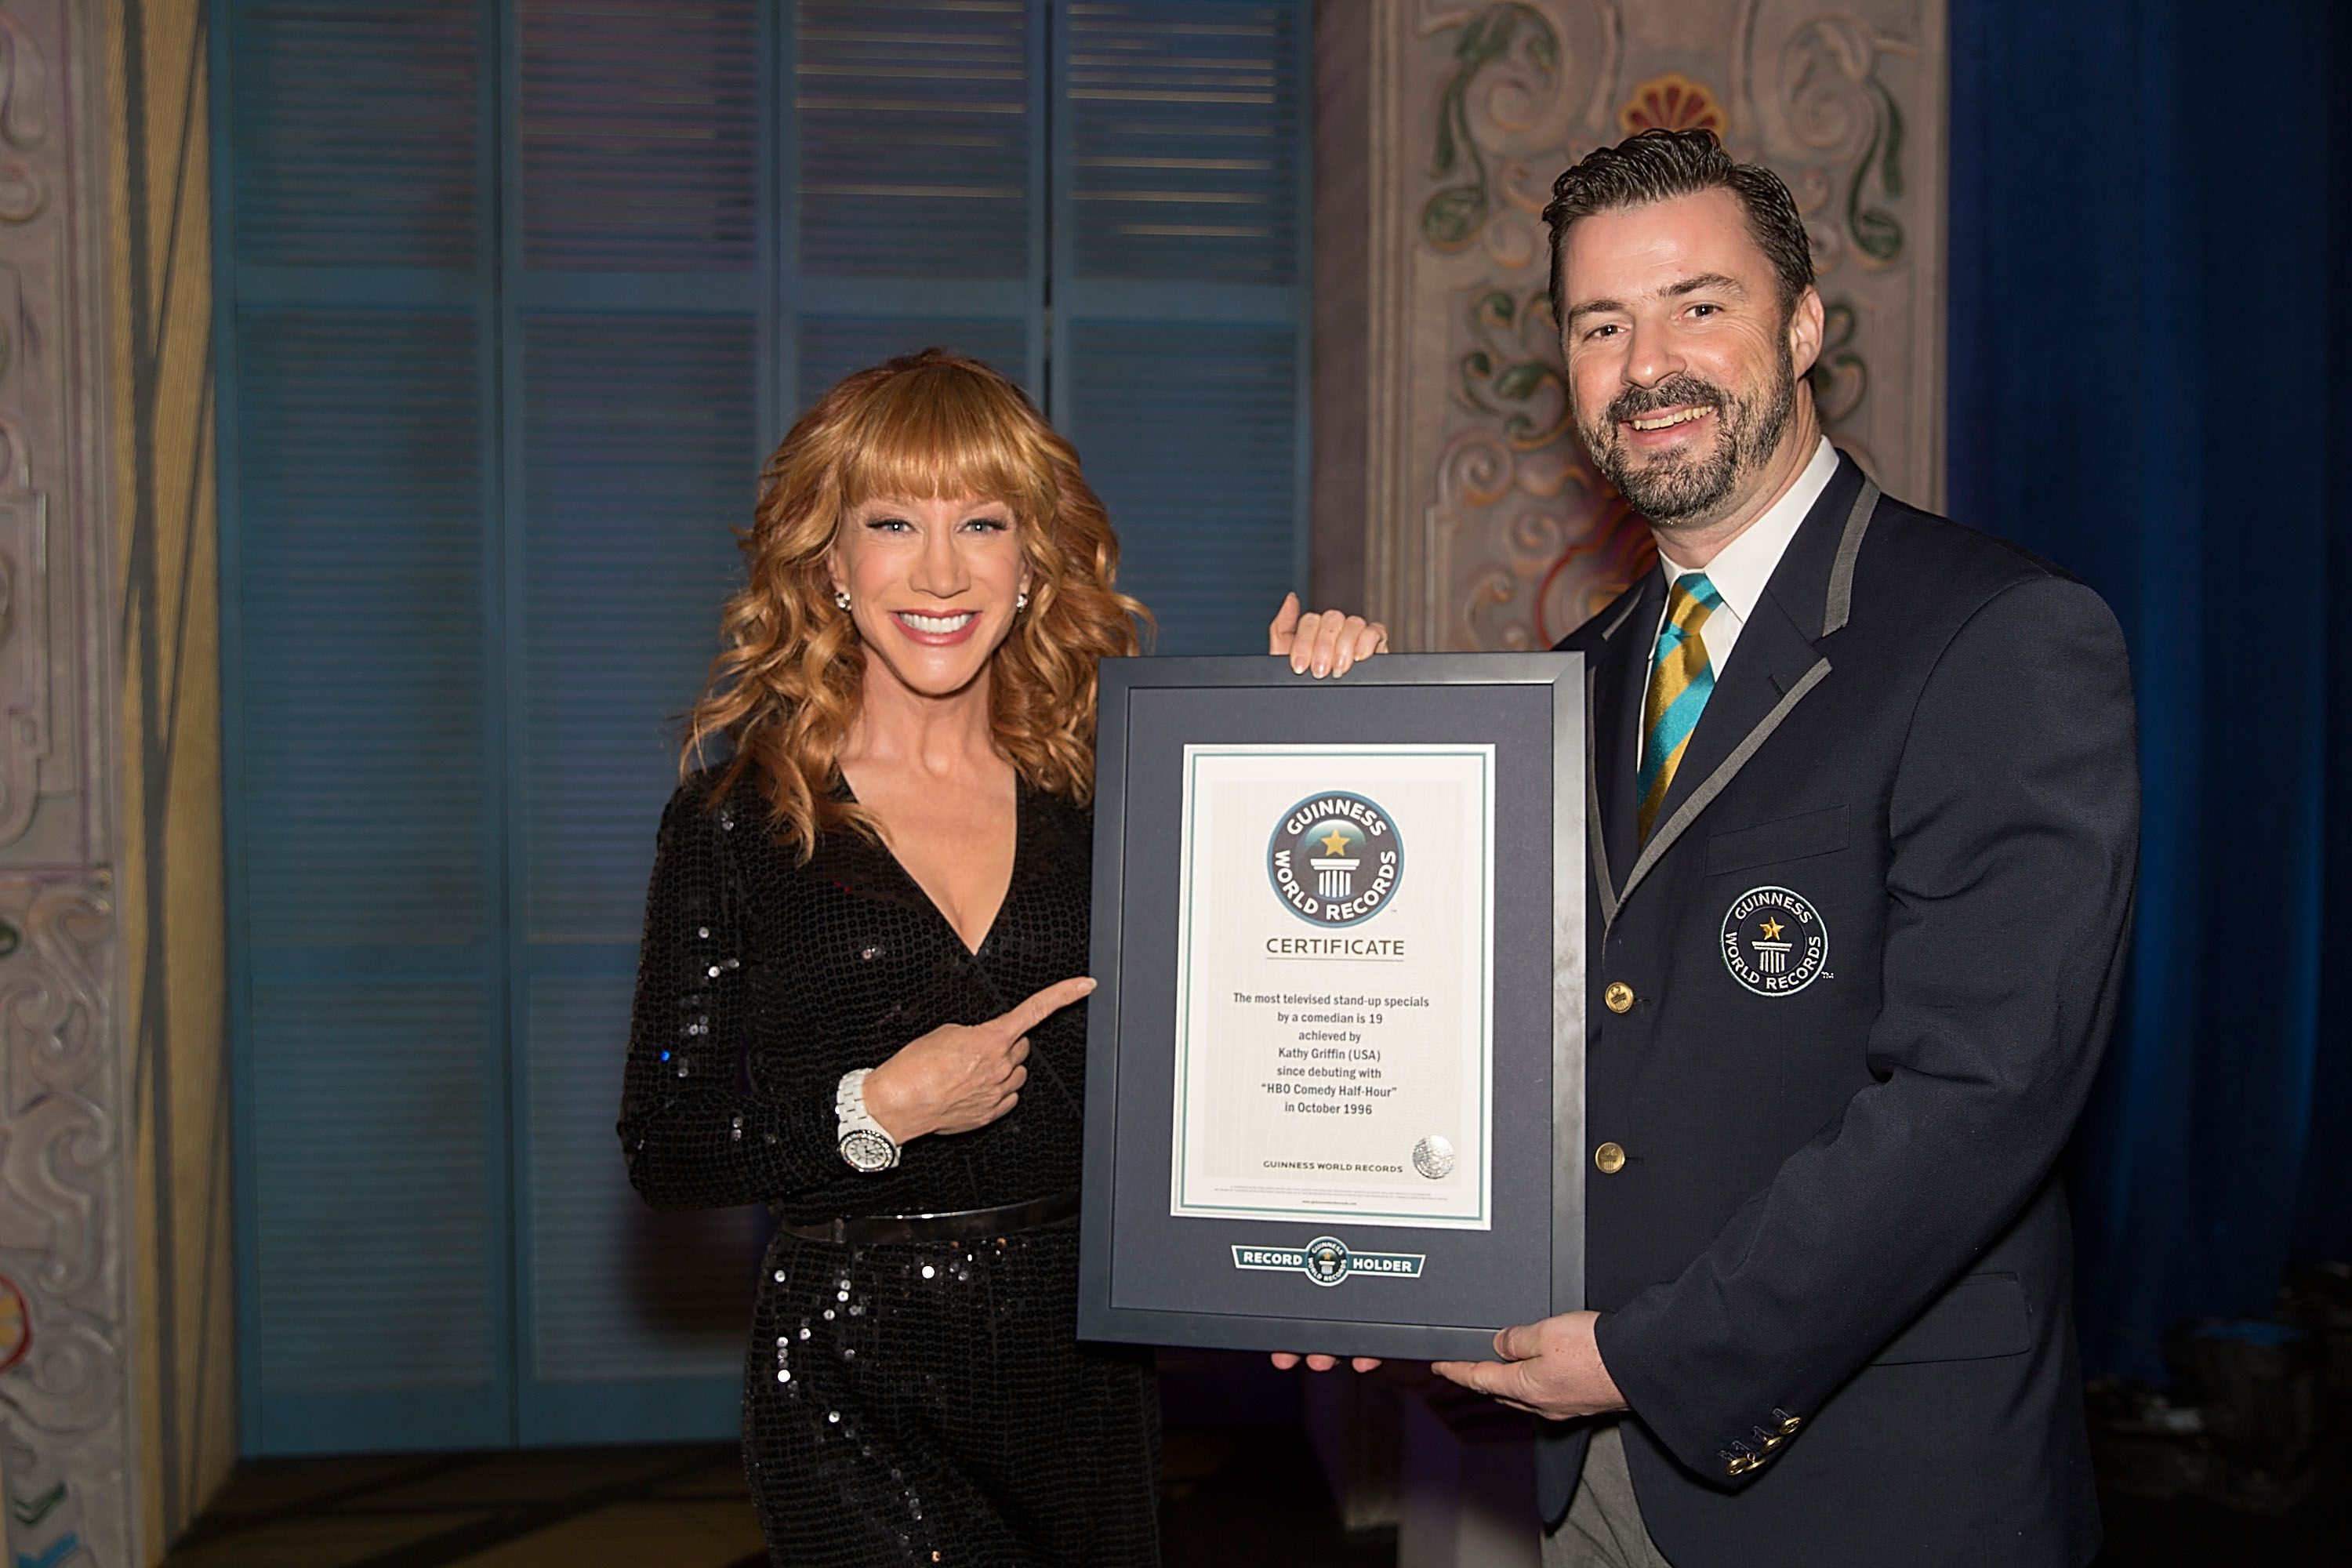 Kathy Griffin with a Guinness World Record representative after breaking the Guinness World Record for the most stand-up comedy specials by a comedian on November 24, 2013. | Source: Getty Images